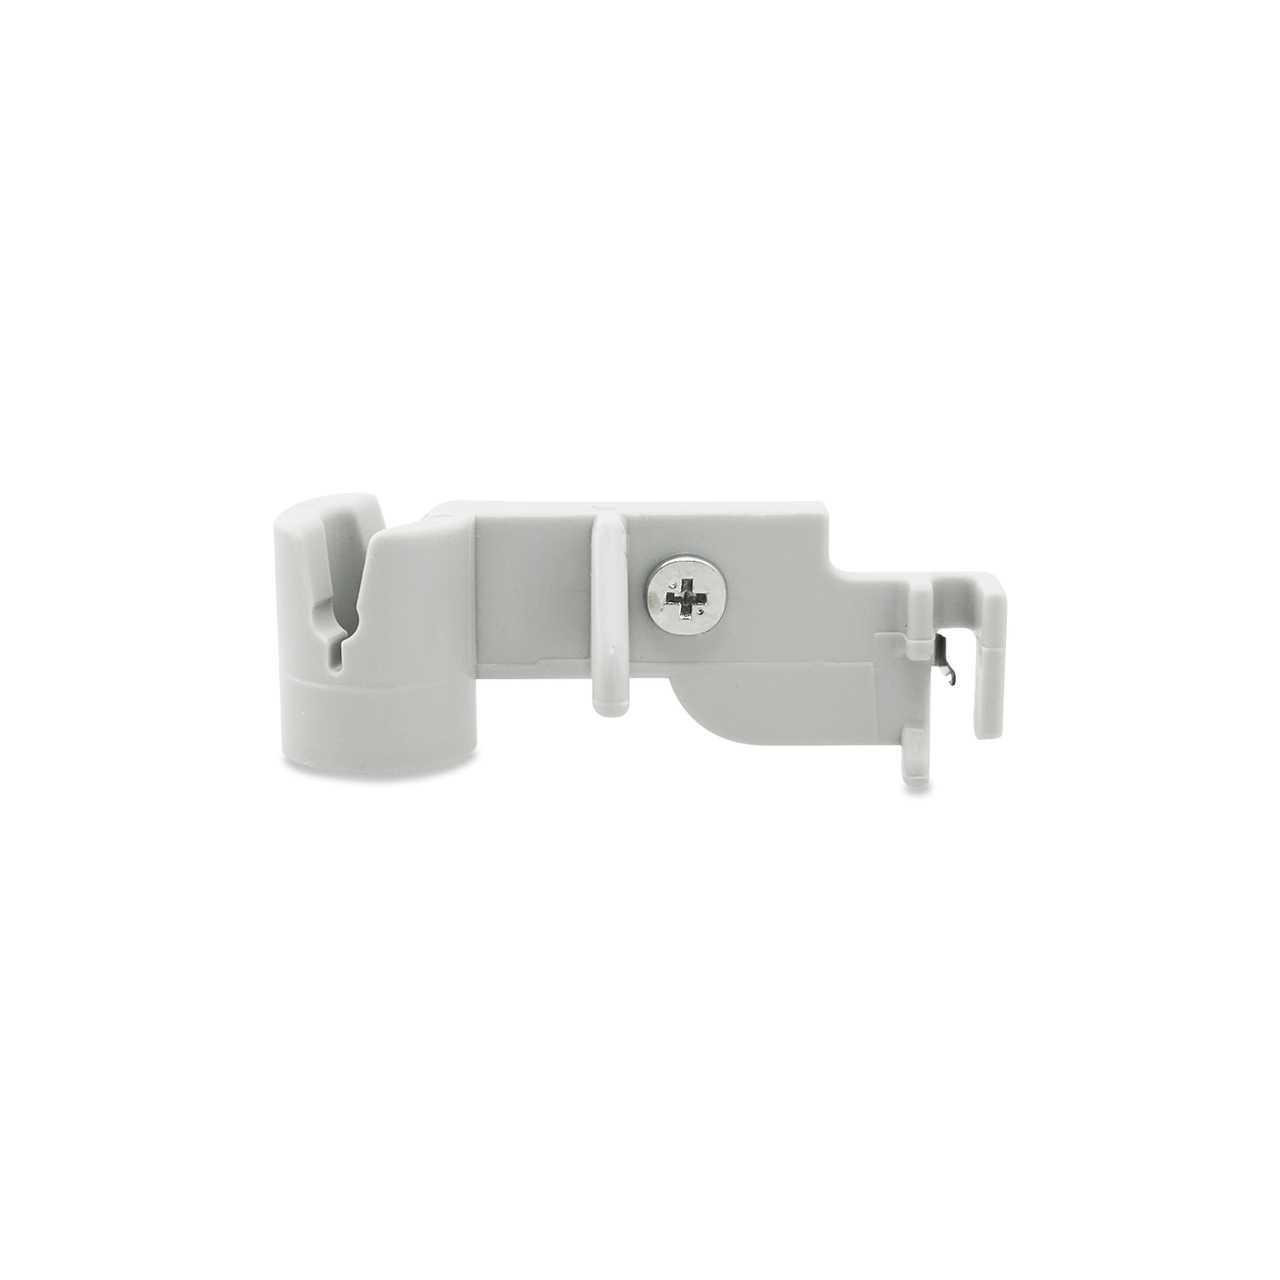 Janome Needle Threader (All Models) - Genuine Janome Part